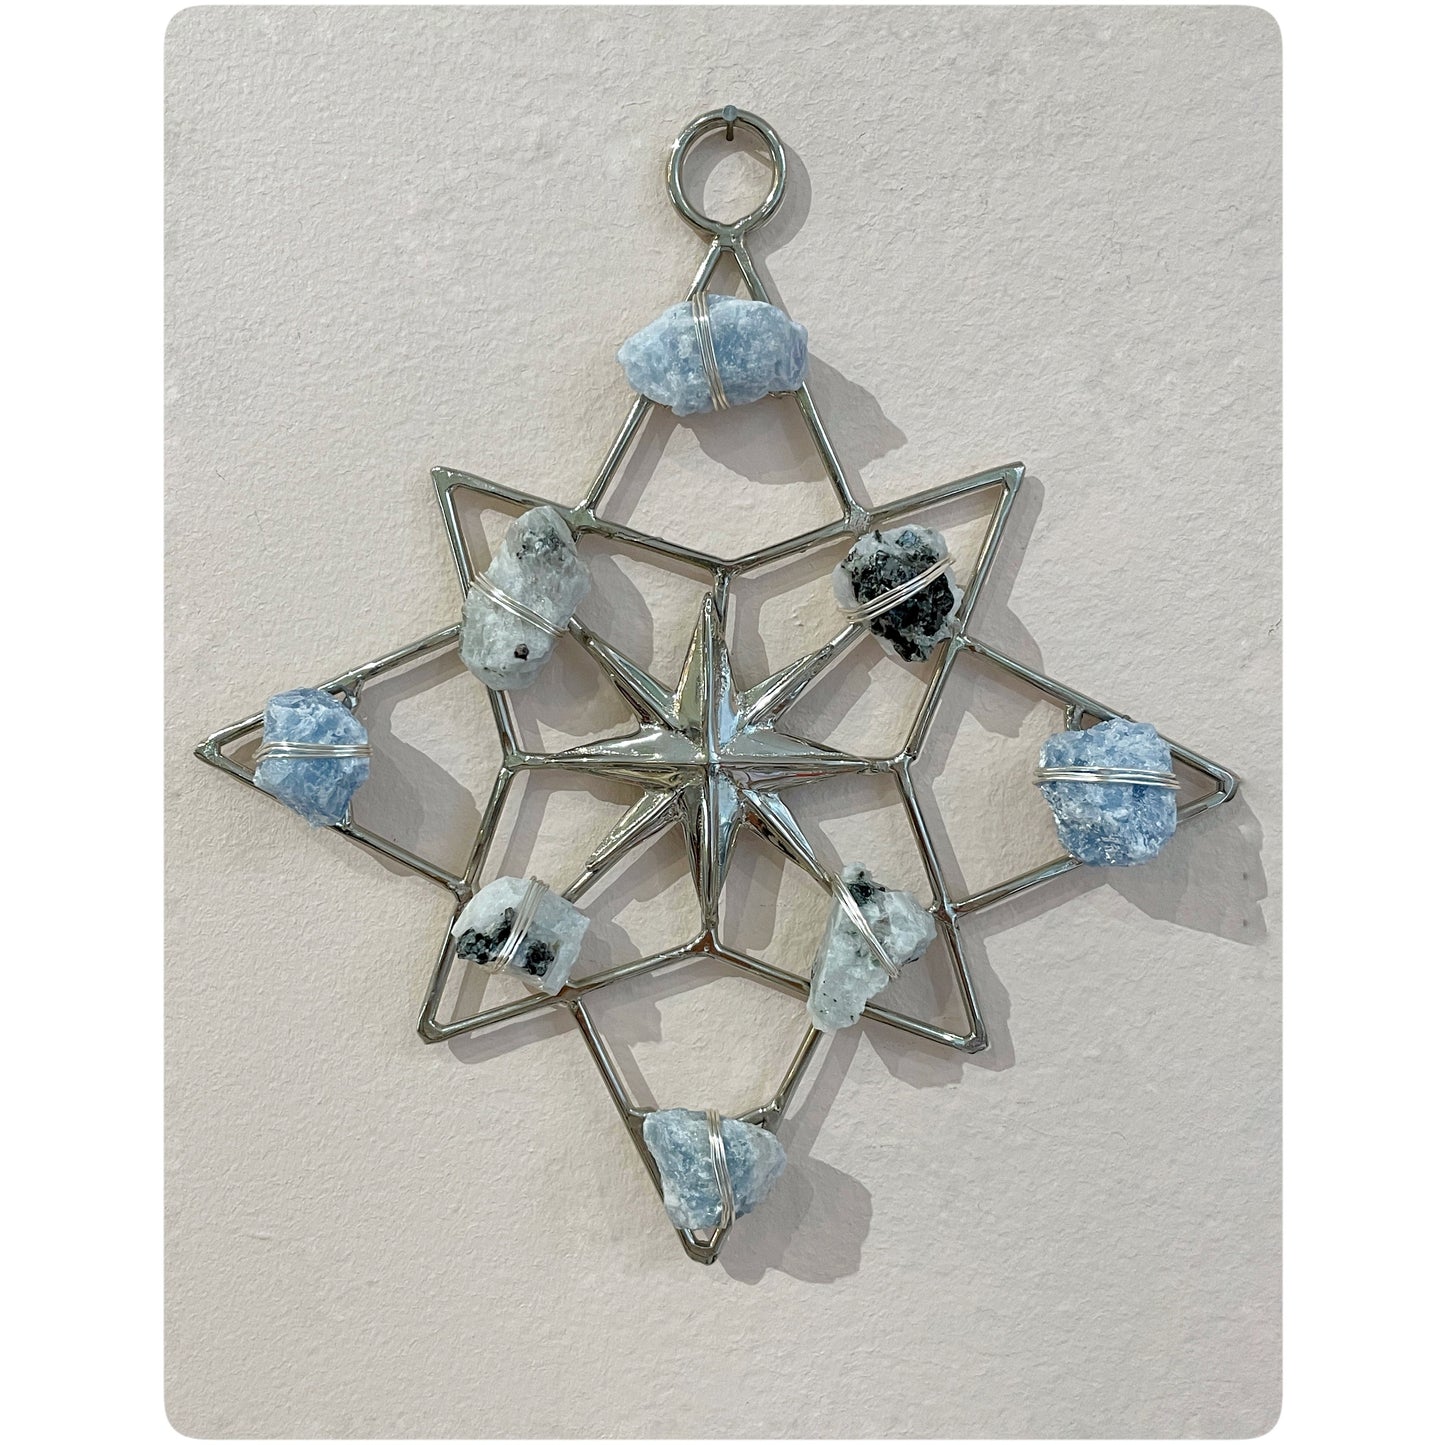 North Star Healing Crystal Grid Moonstone & Blue Calcite by Ariana Ost